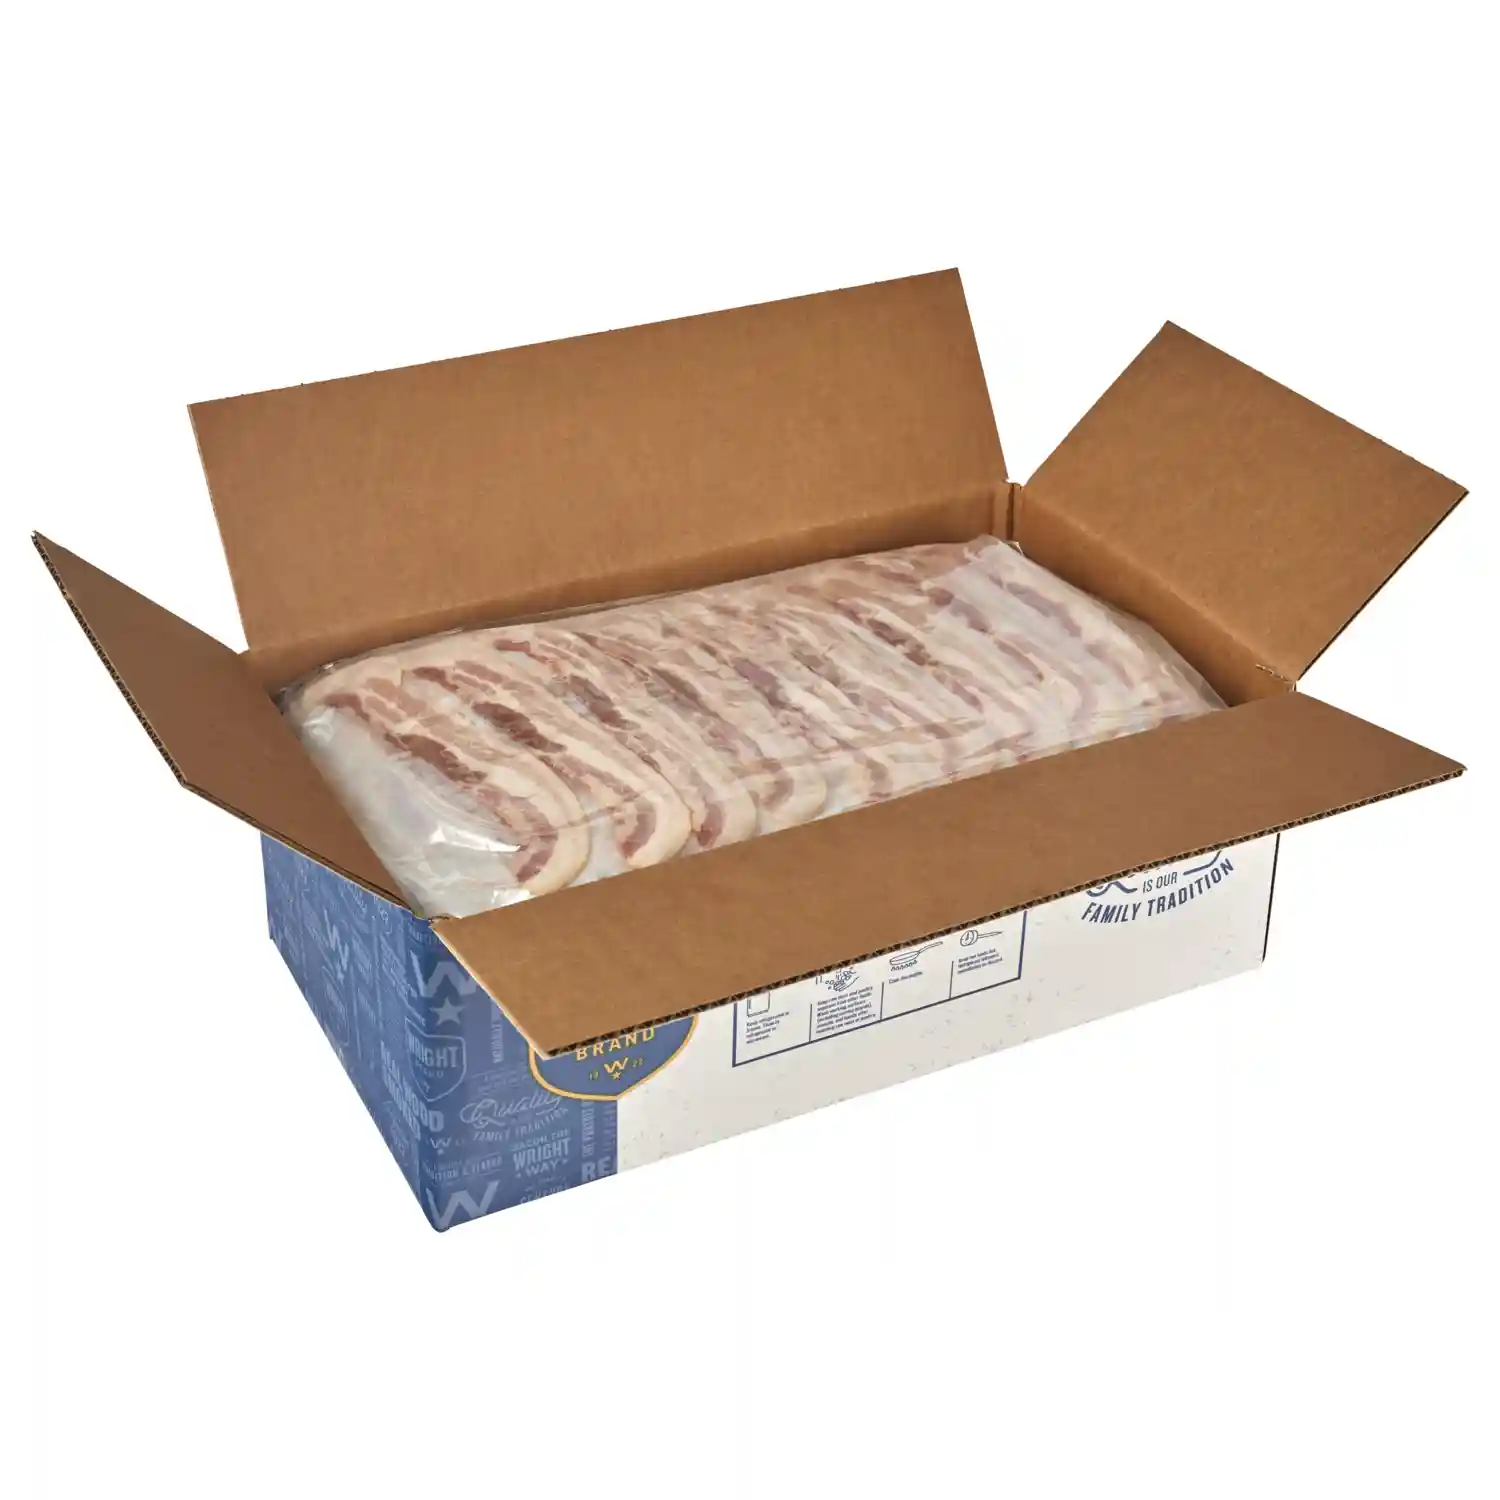 Wright® Brand Naturally Hickory Smoked Thin Sliced Bacon, Flat-Pack®, 15 Lbs, 18-22 Slices per Pound, Gas Flushed_image_41